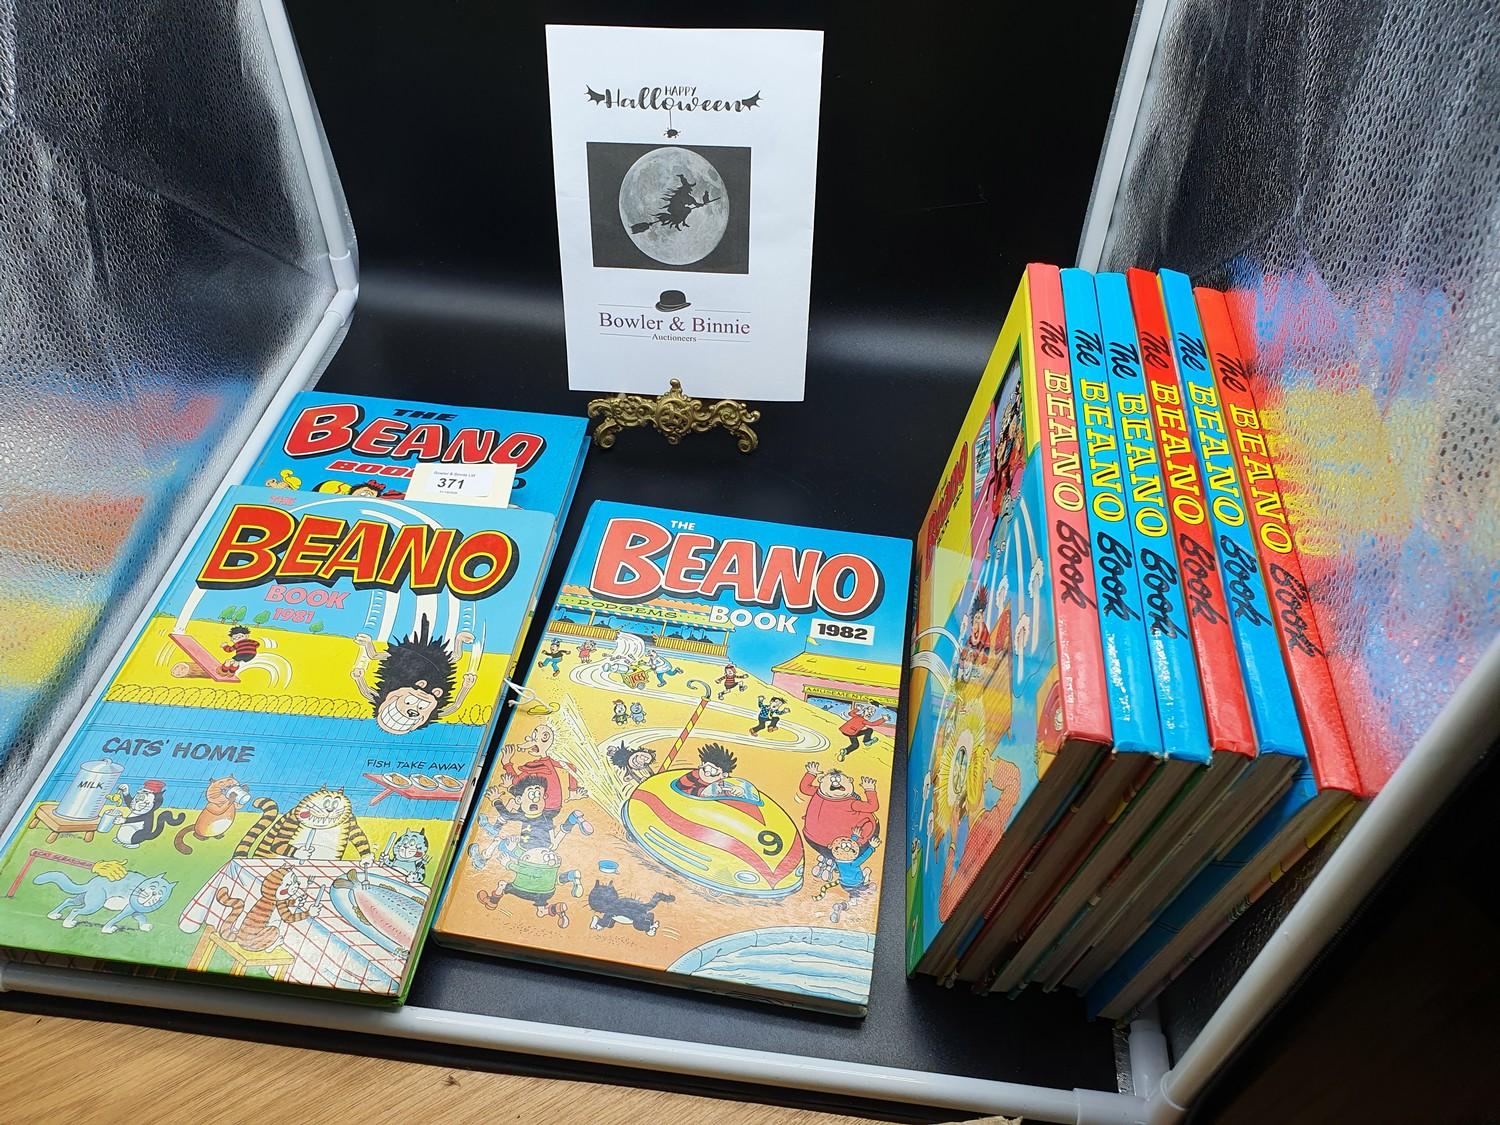 A Collection of The Beano Annual books dated 1980-1989. [Missing 1984]